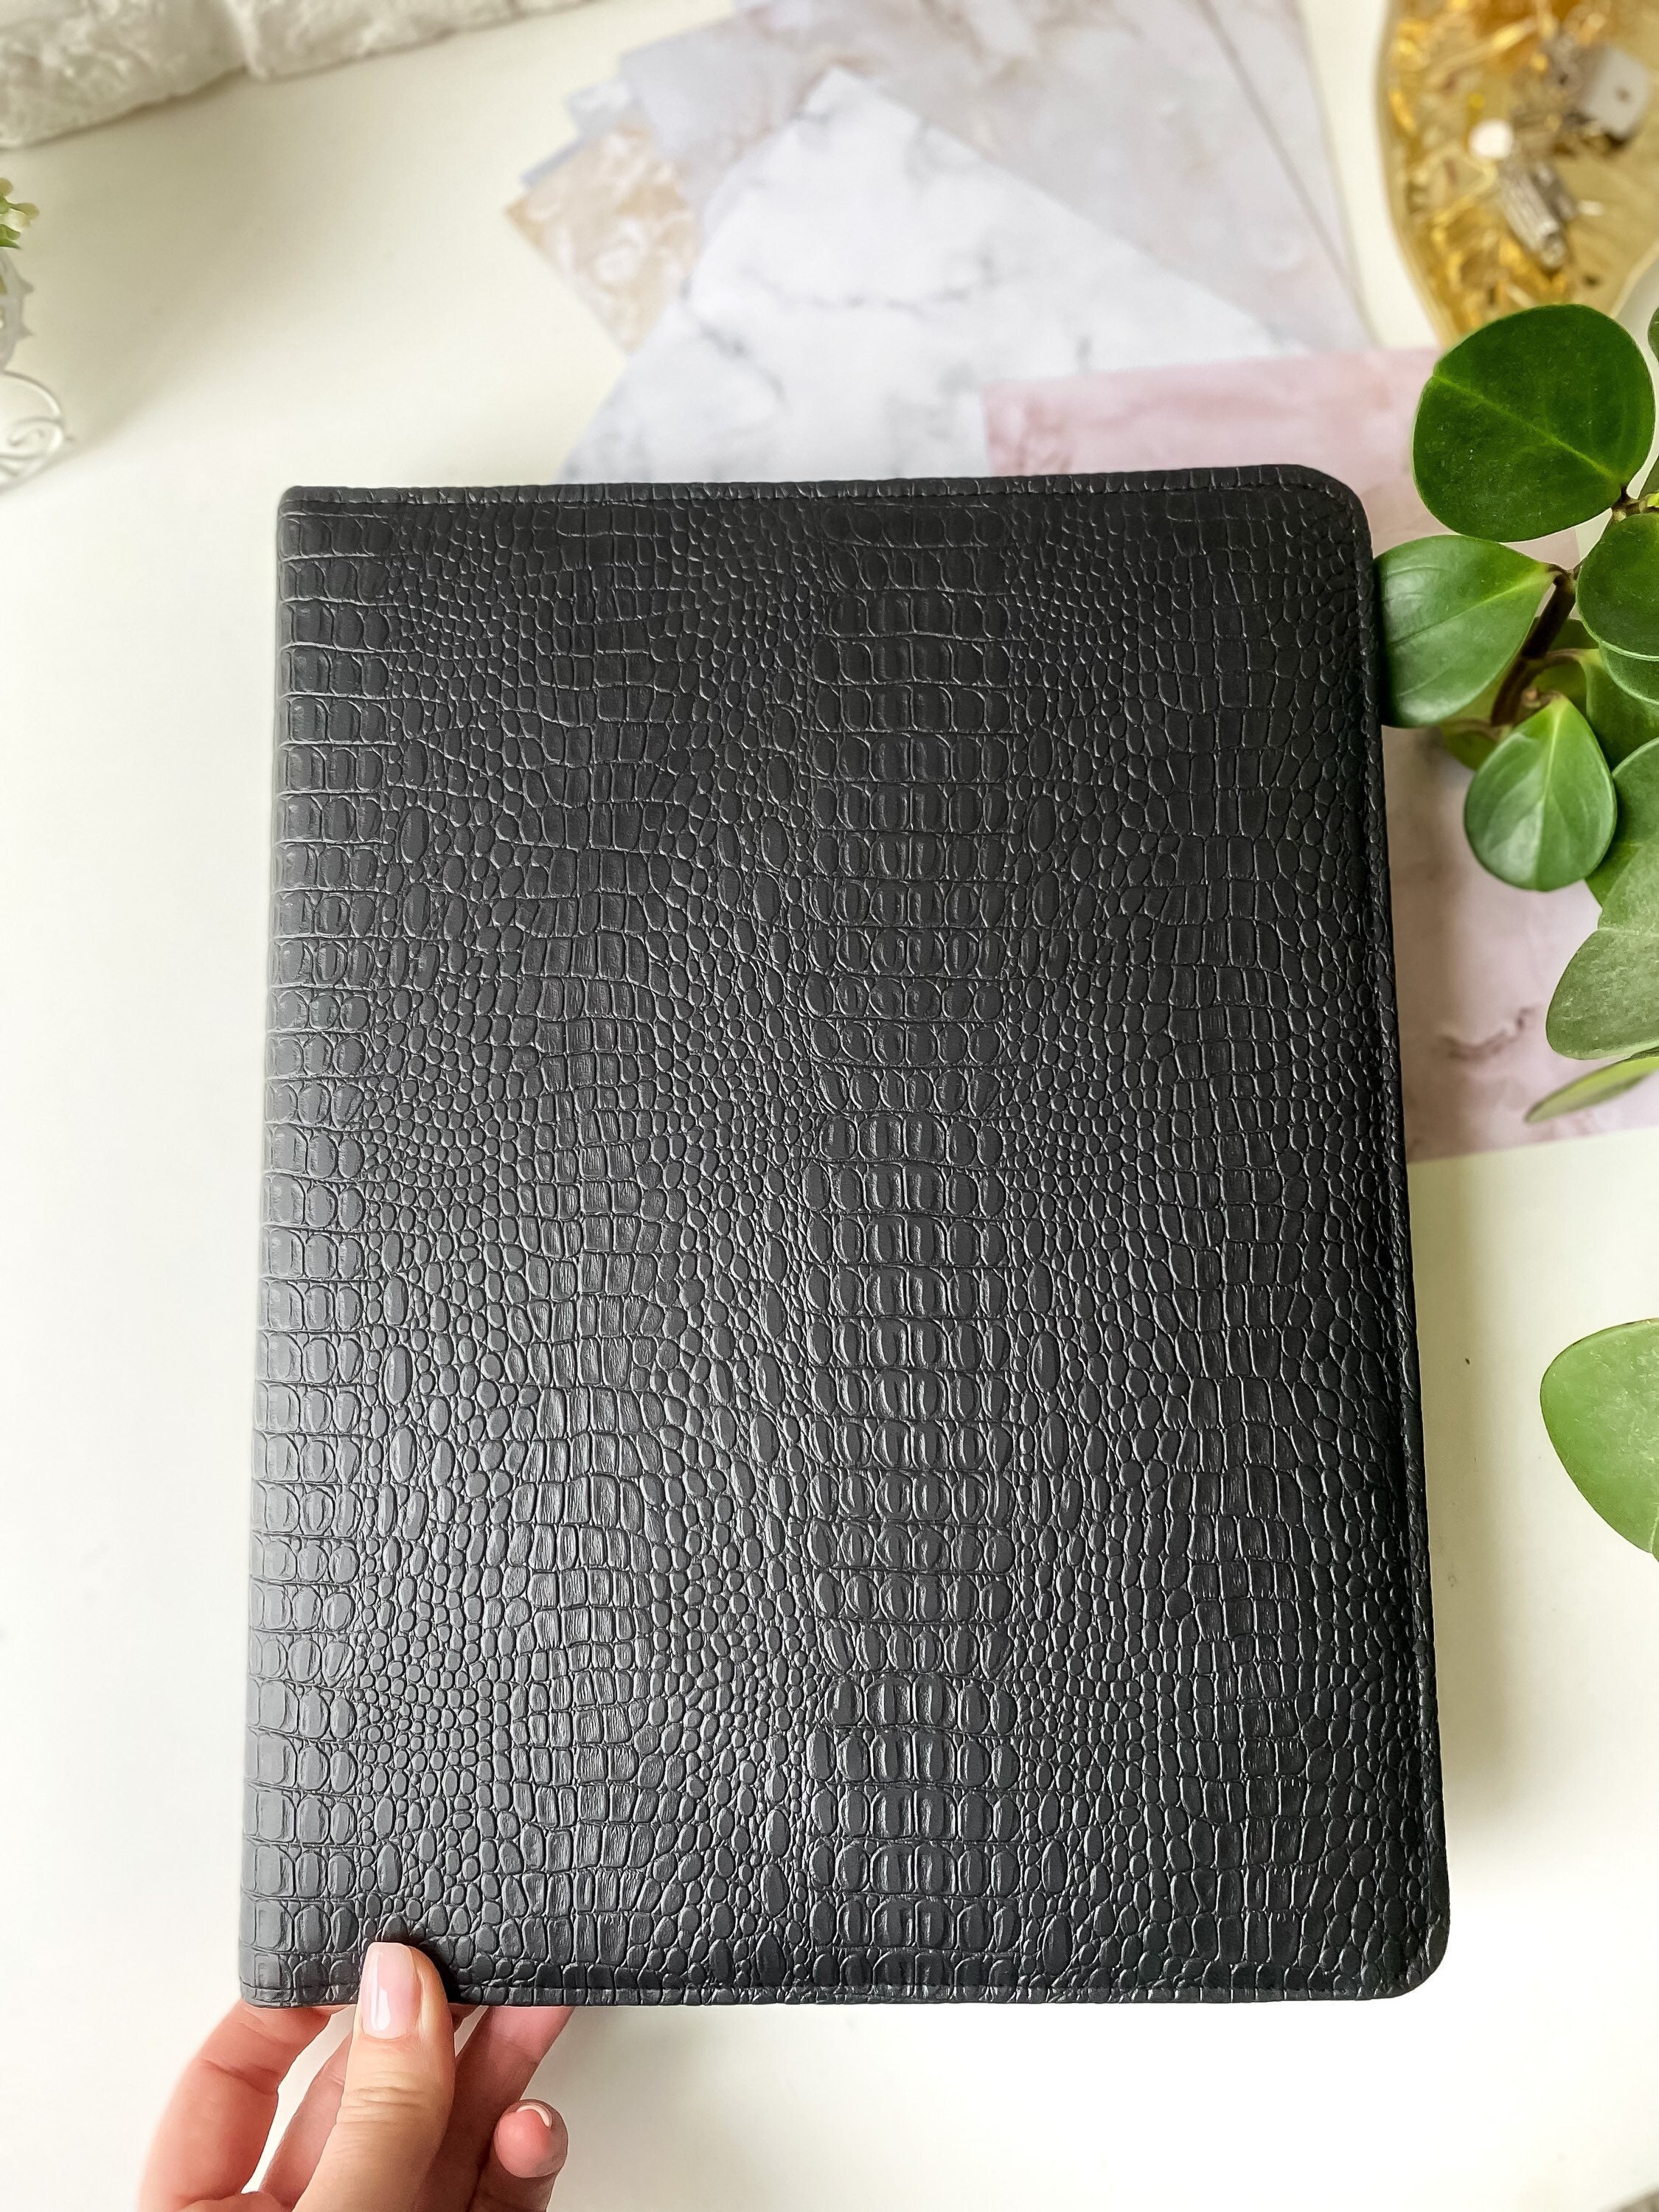 Handcrafted Leather File Portfolio for Documents or Artwork – Rustico